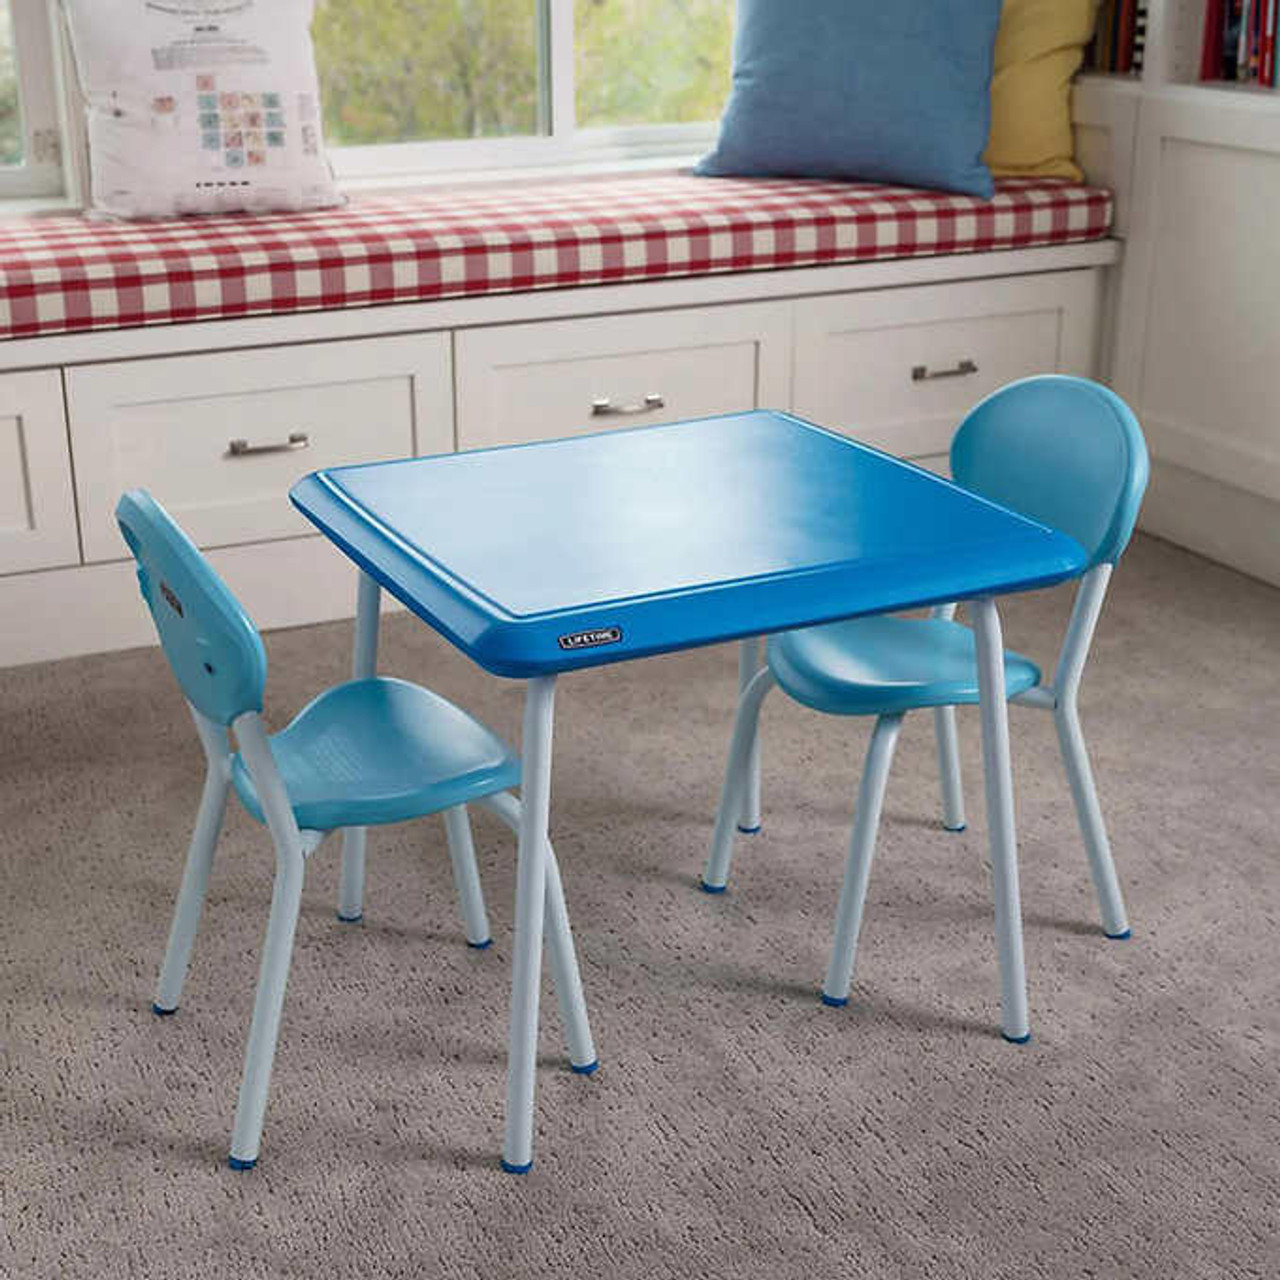 LIFETIME Lifetime Essential Children’s Square Table and 2 Chair Set - Stackable Chairs 